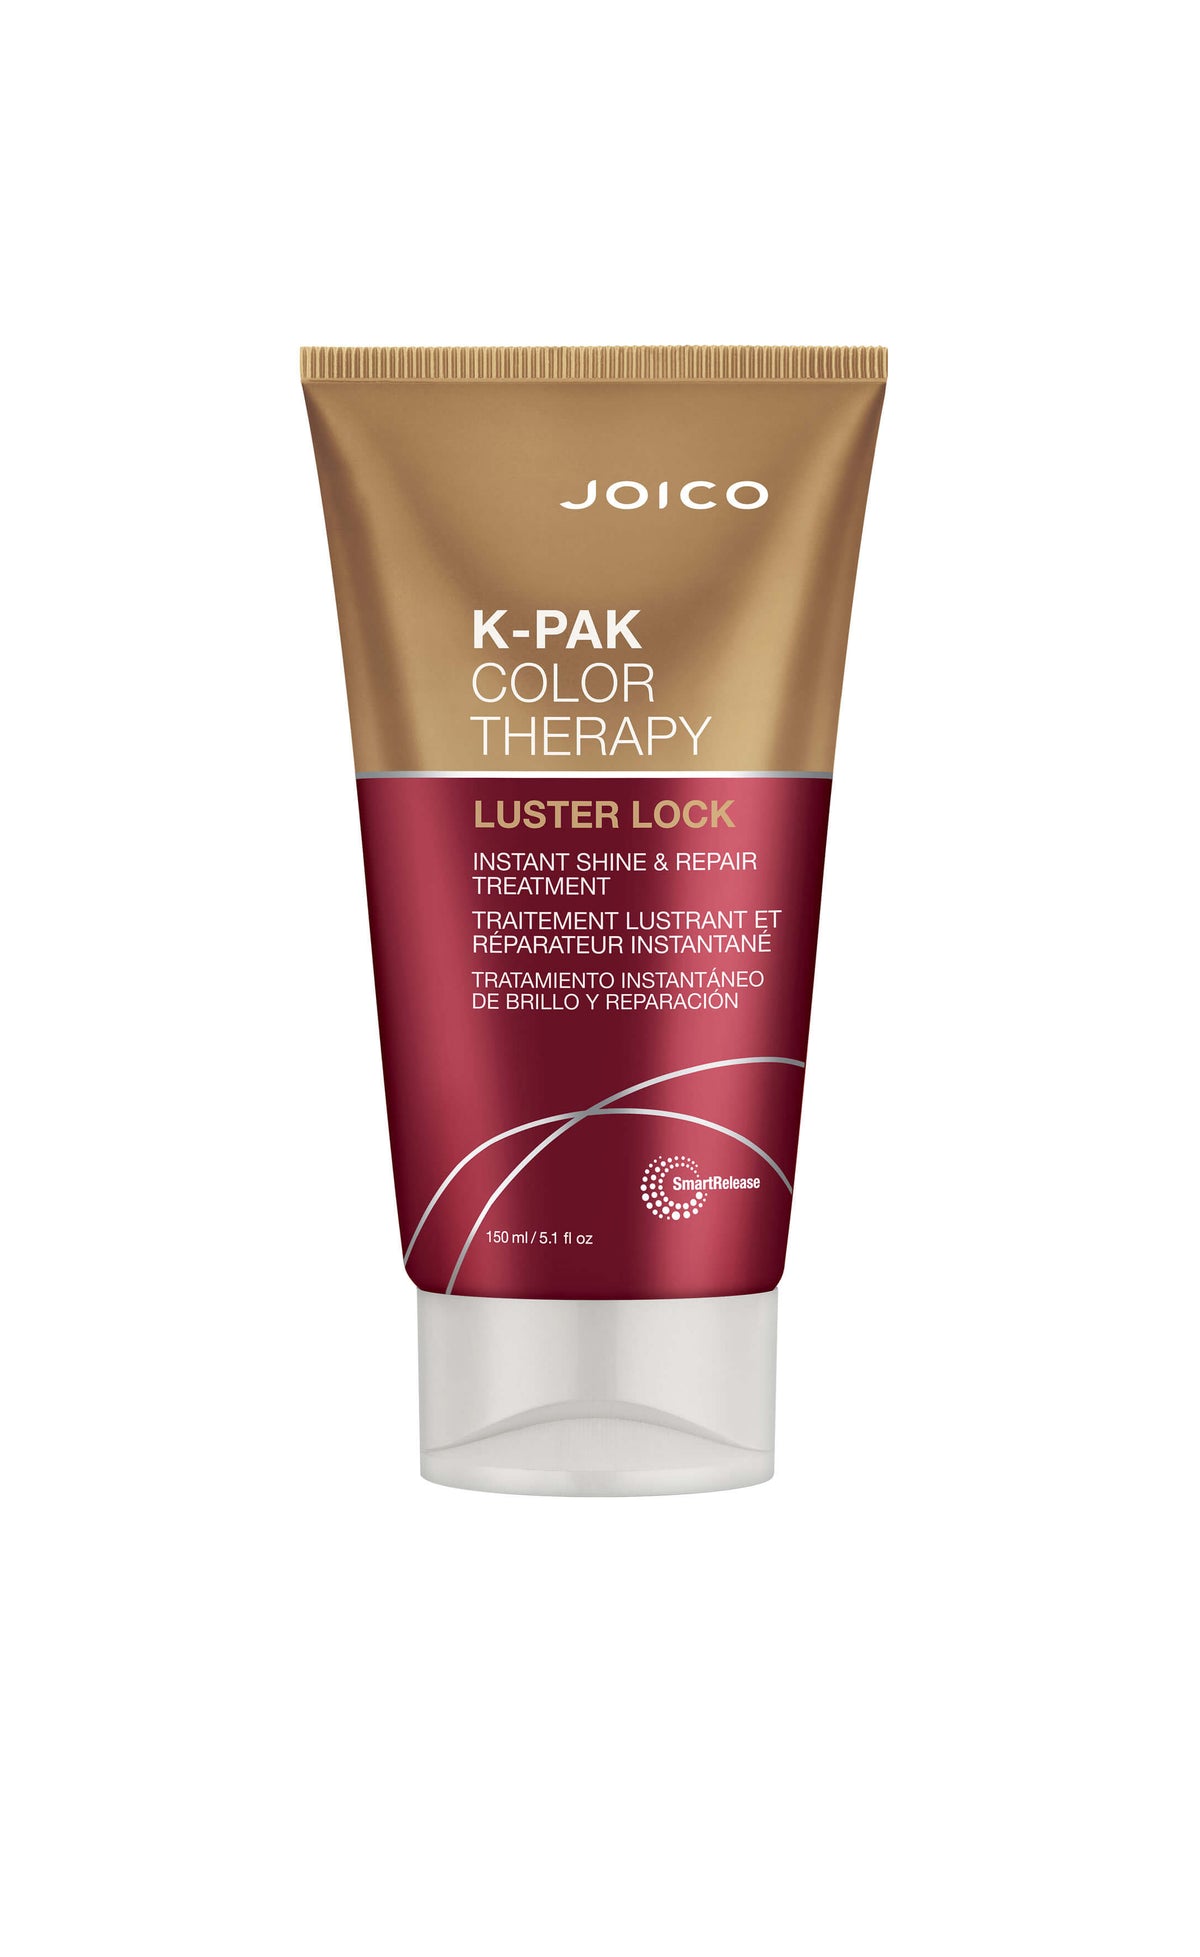 Joico K-Pak Color Therapy Luster Lock Instant Shine & Repair Treatment Haarkur 150 ml